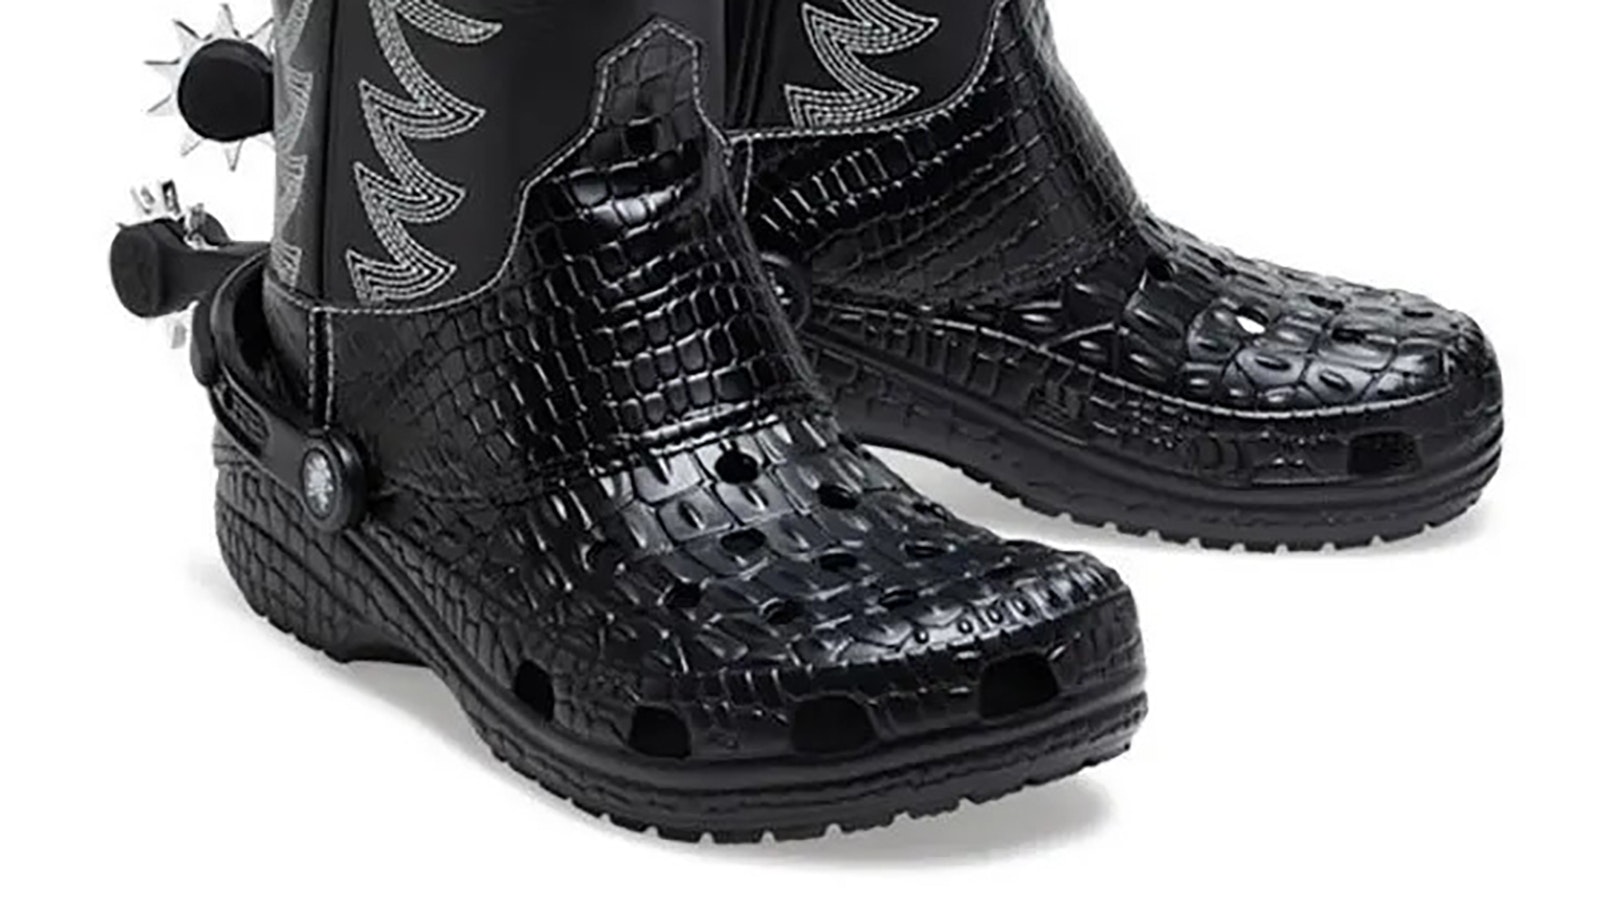 Crocs new cowboy boots don't have the signature, and functional, pointy toe and heel of a traditional cowboy boot.